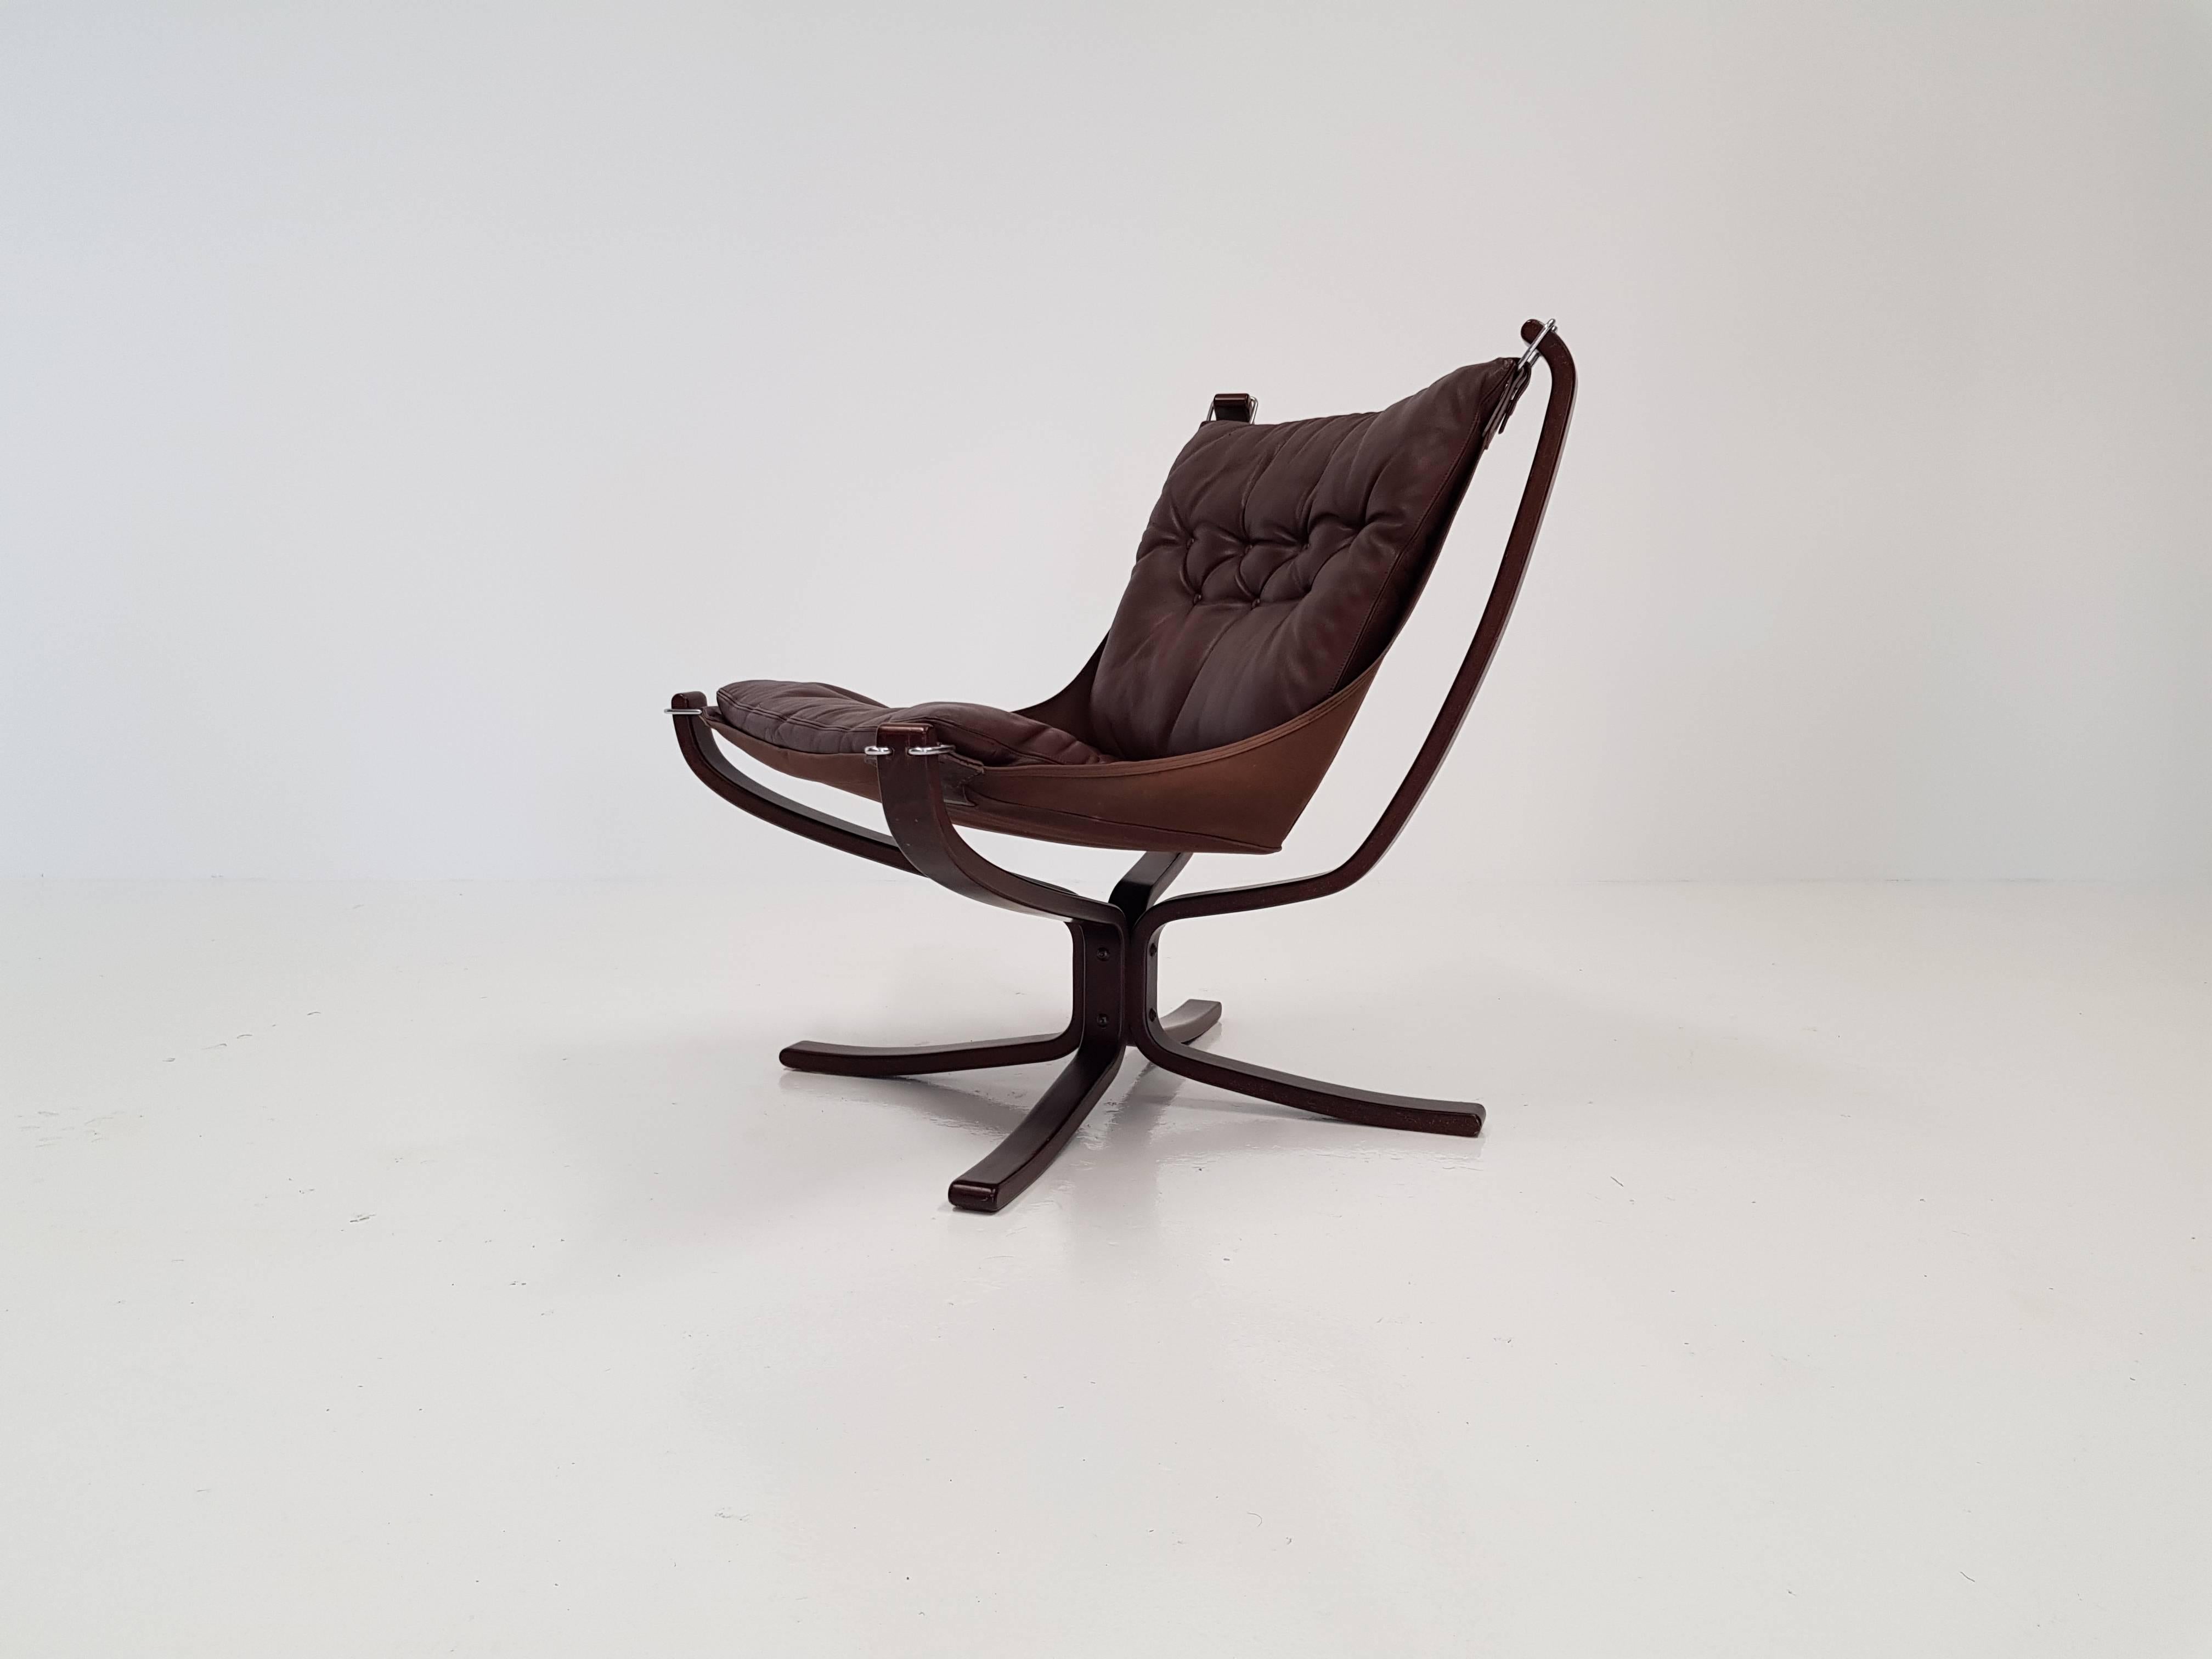 Stained Vintage Low-Backed X-Framed Sigurd Ressell Designed Falcon Chair, 1970s